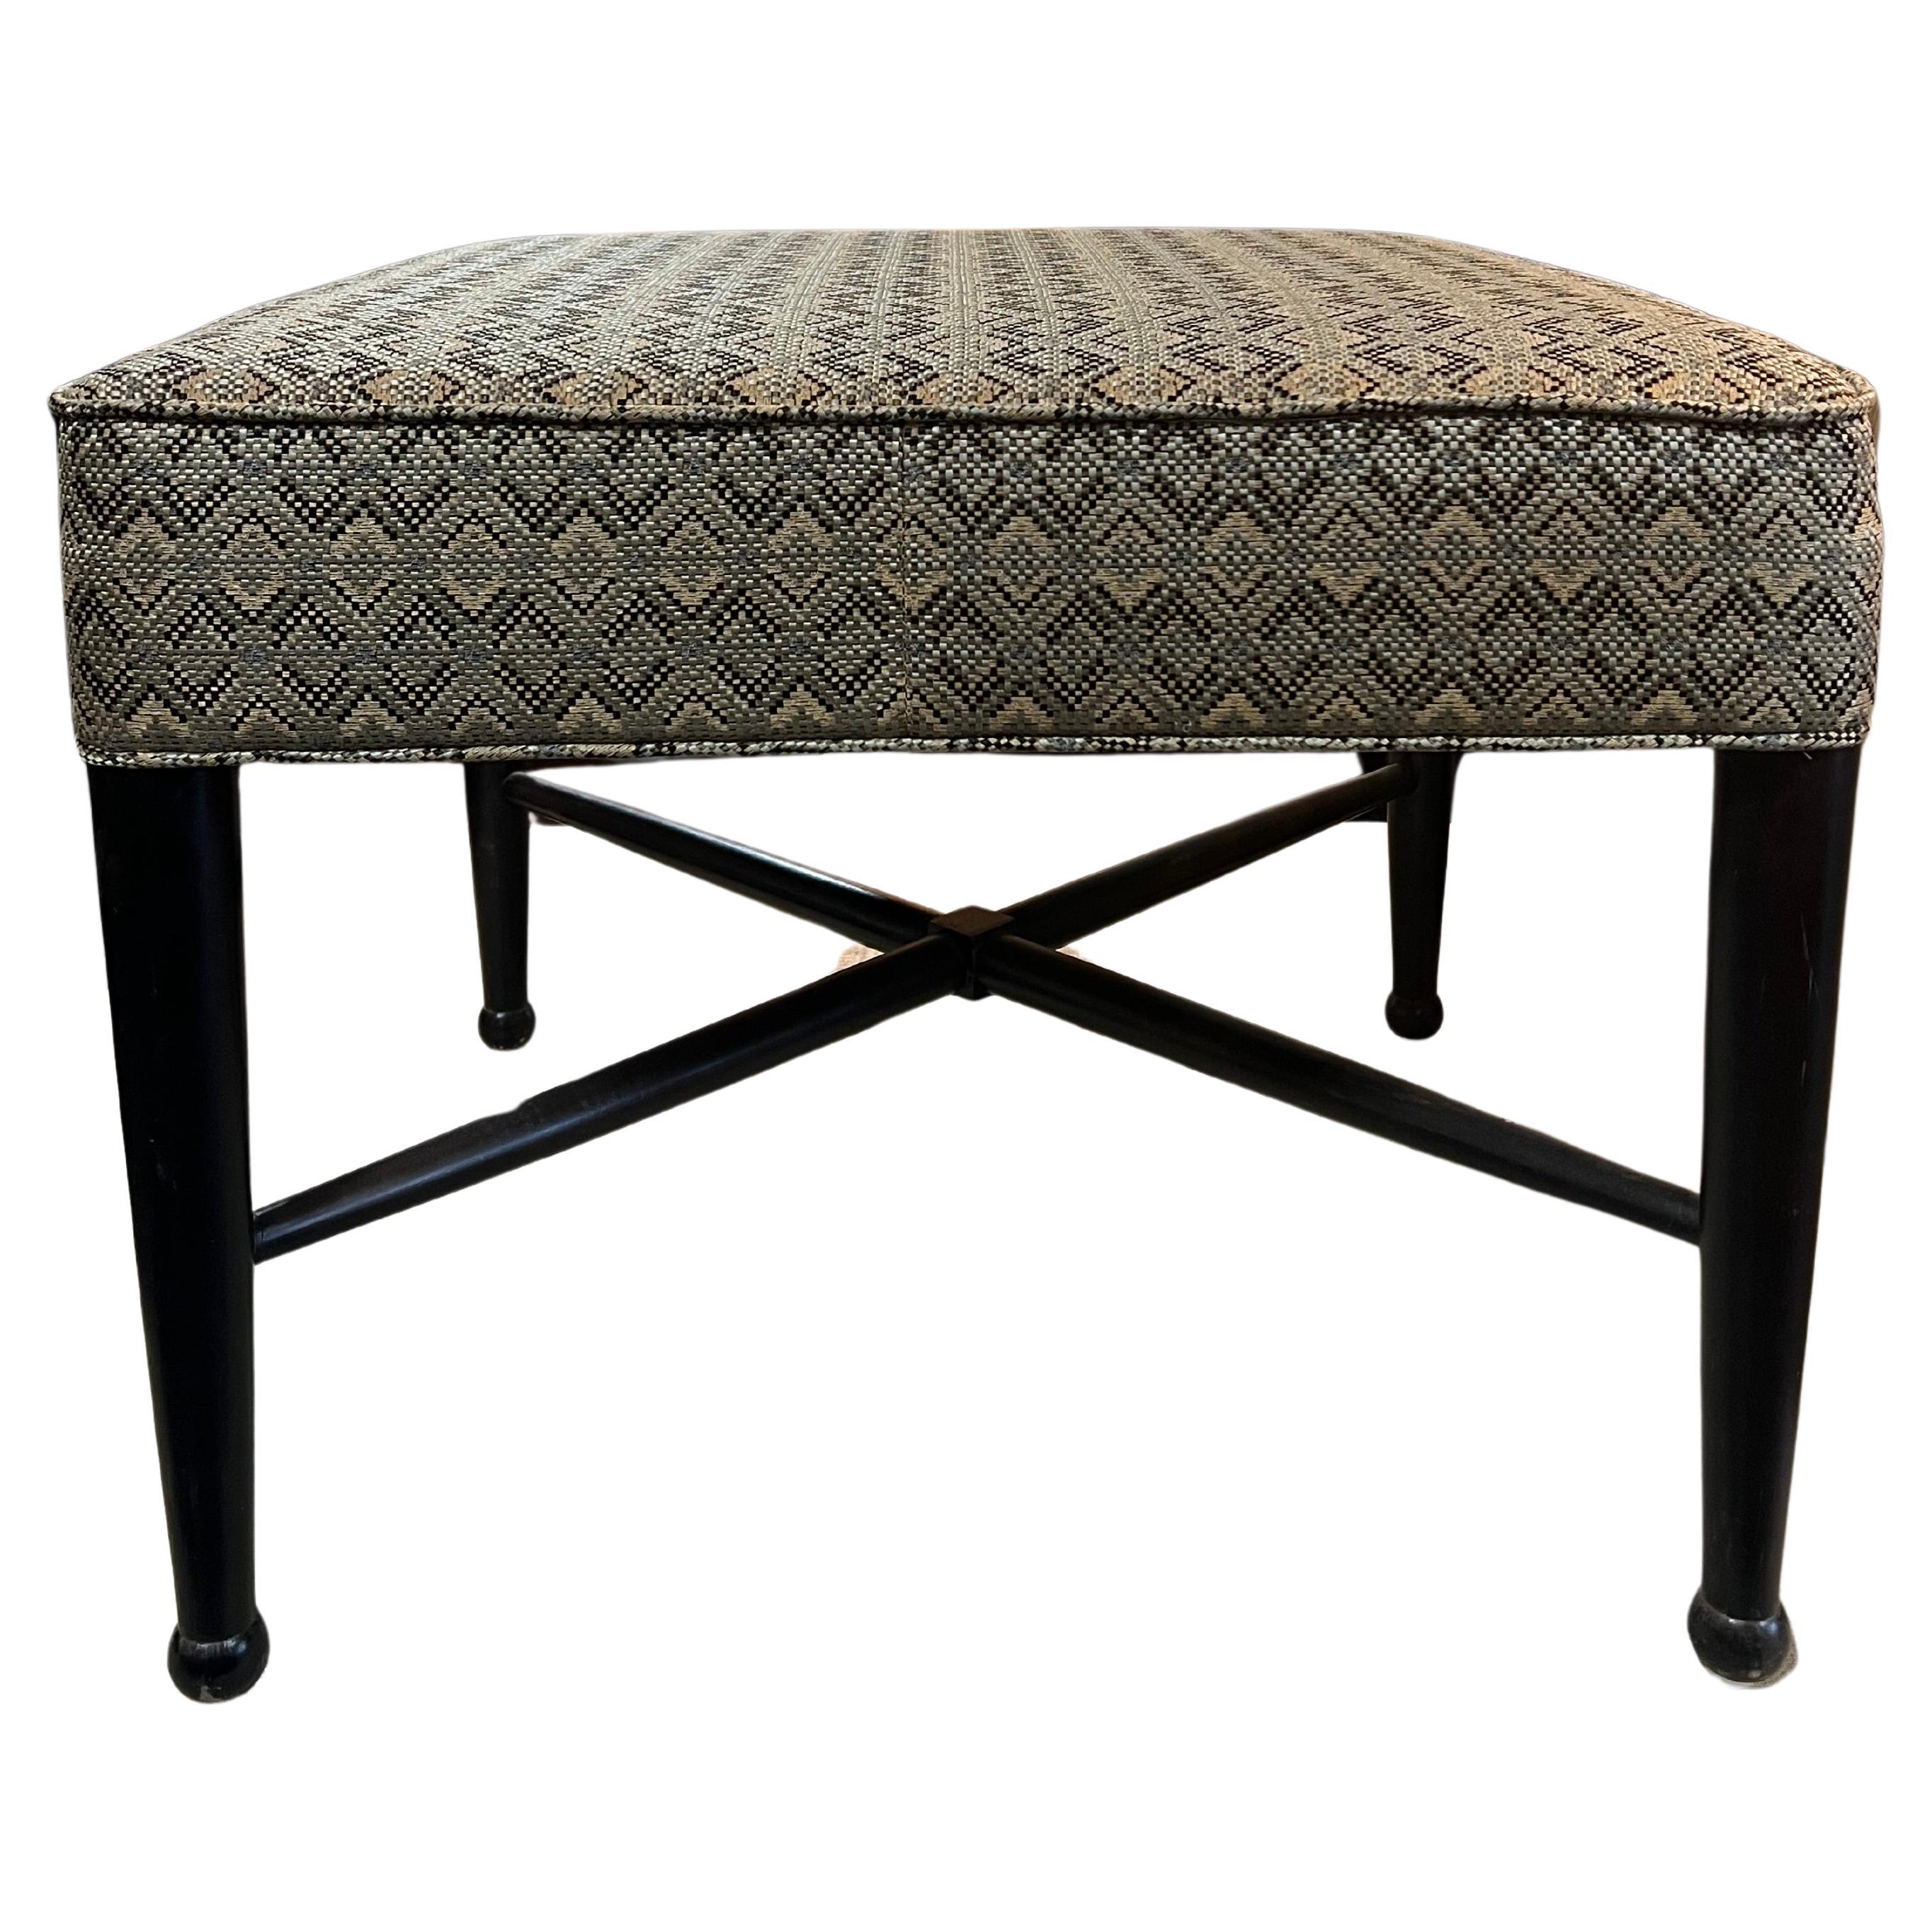 Midcentury Square Ottoman in style of Edward Wormley 